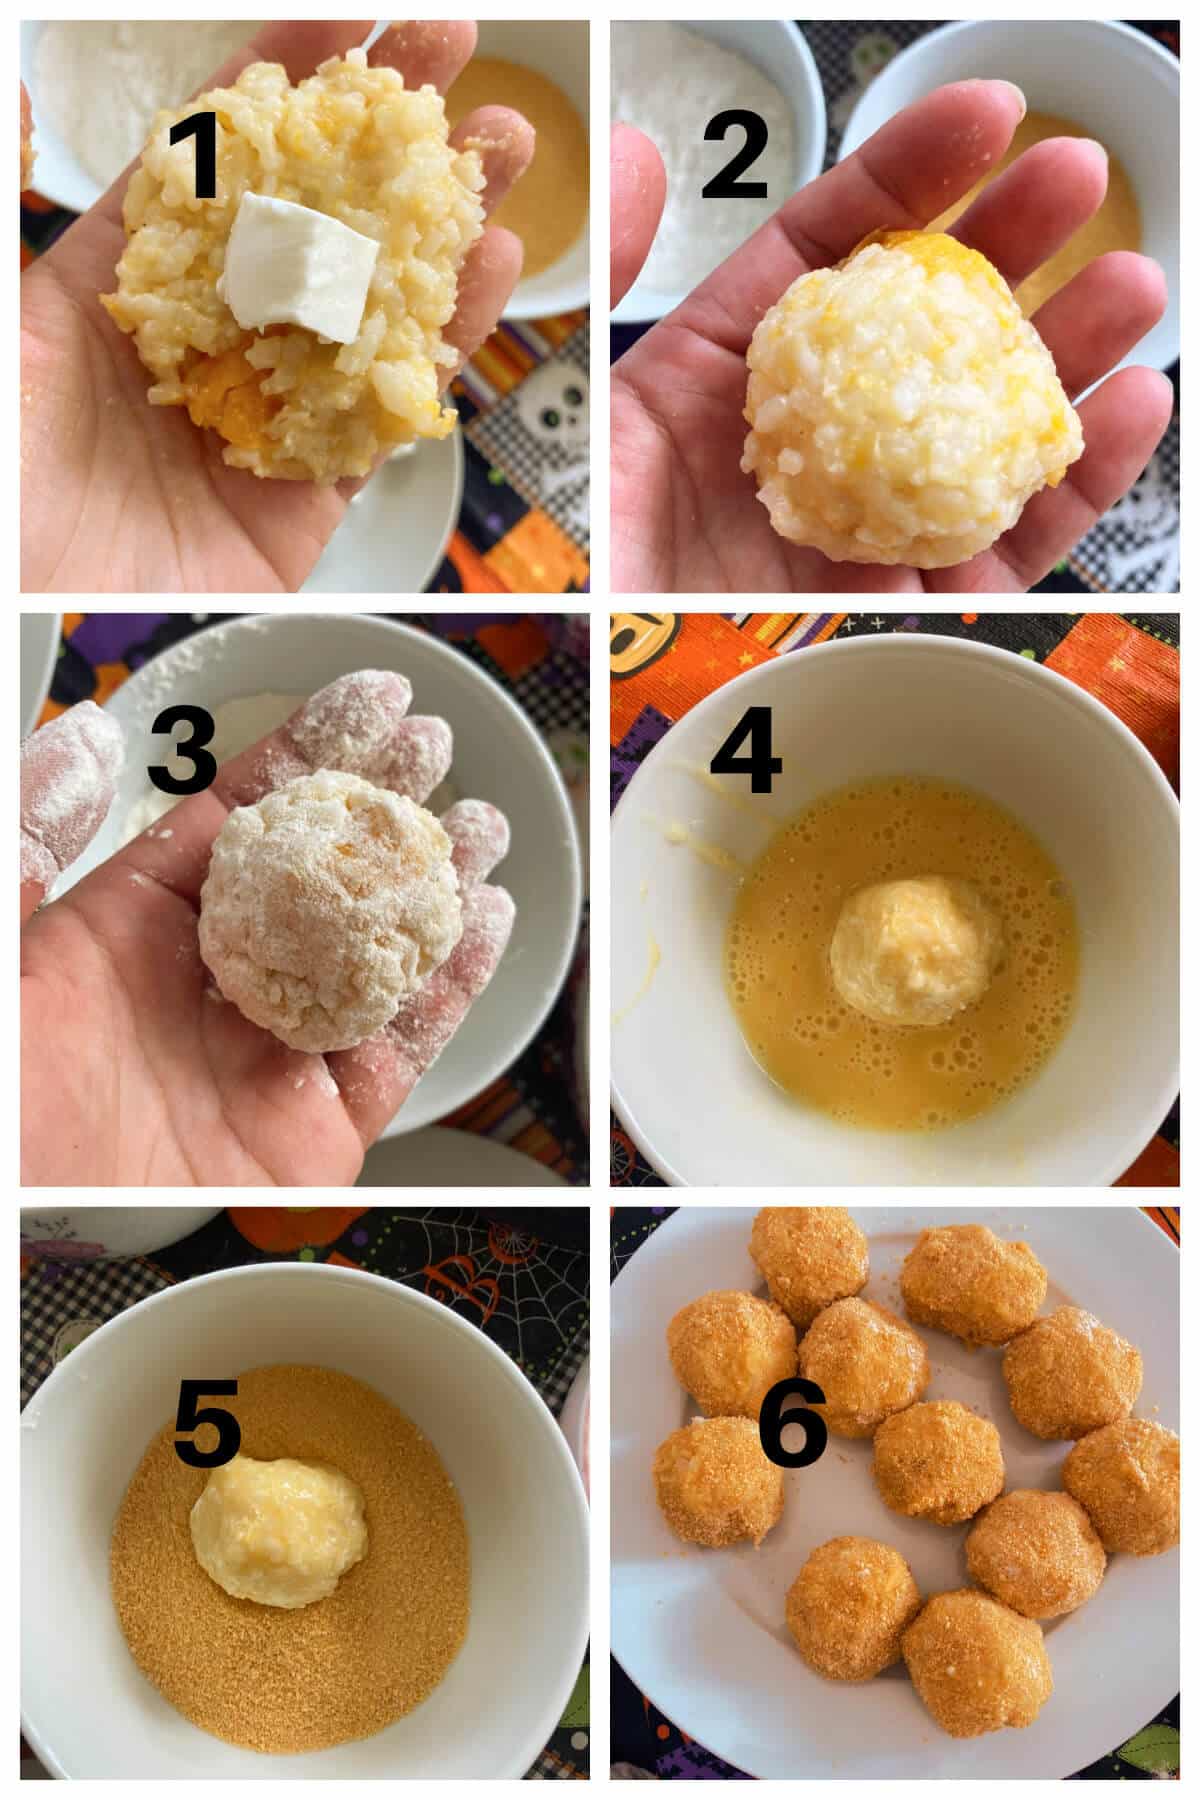 Collage of 6 photos to show how to make risotto balls.